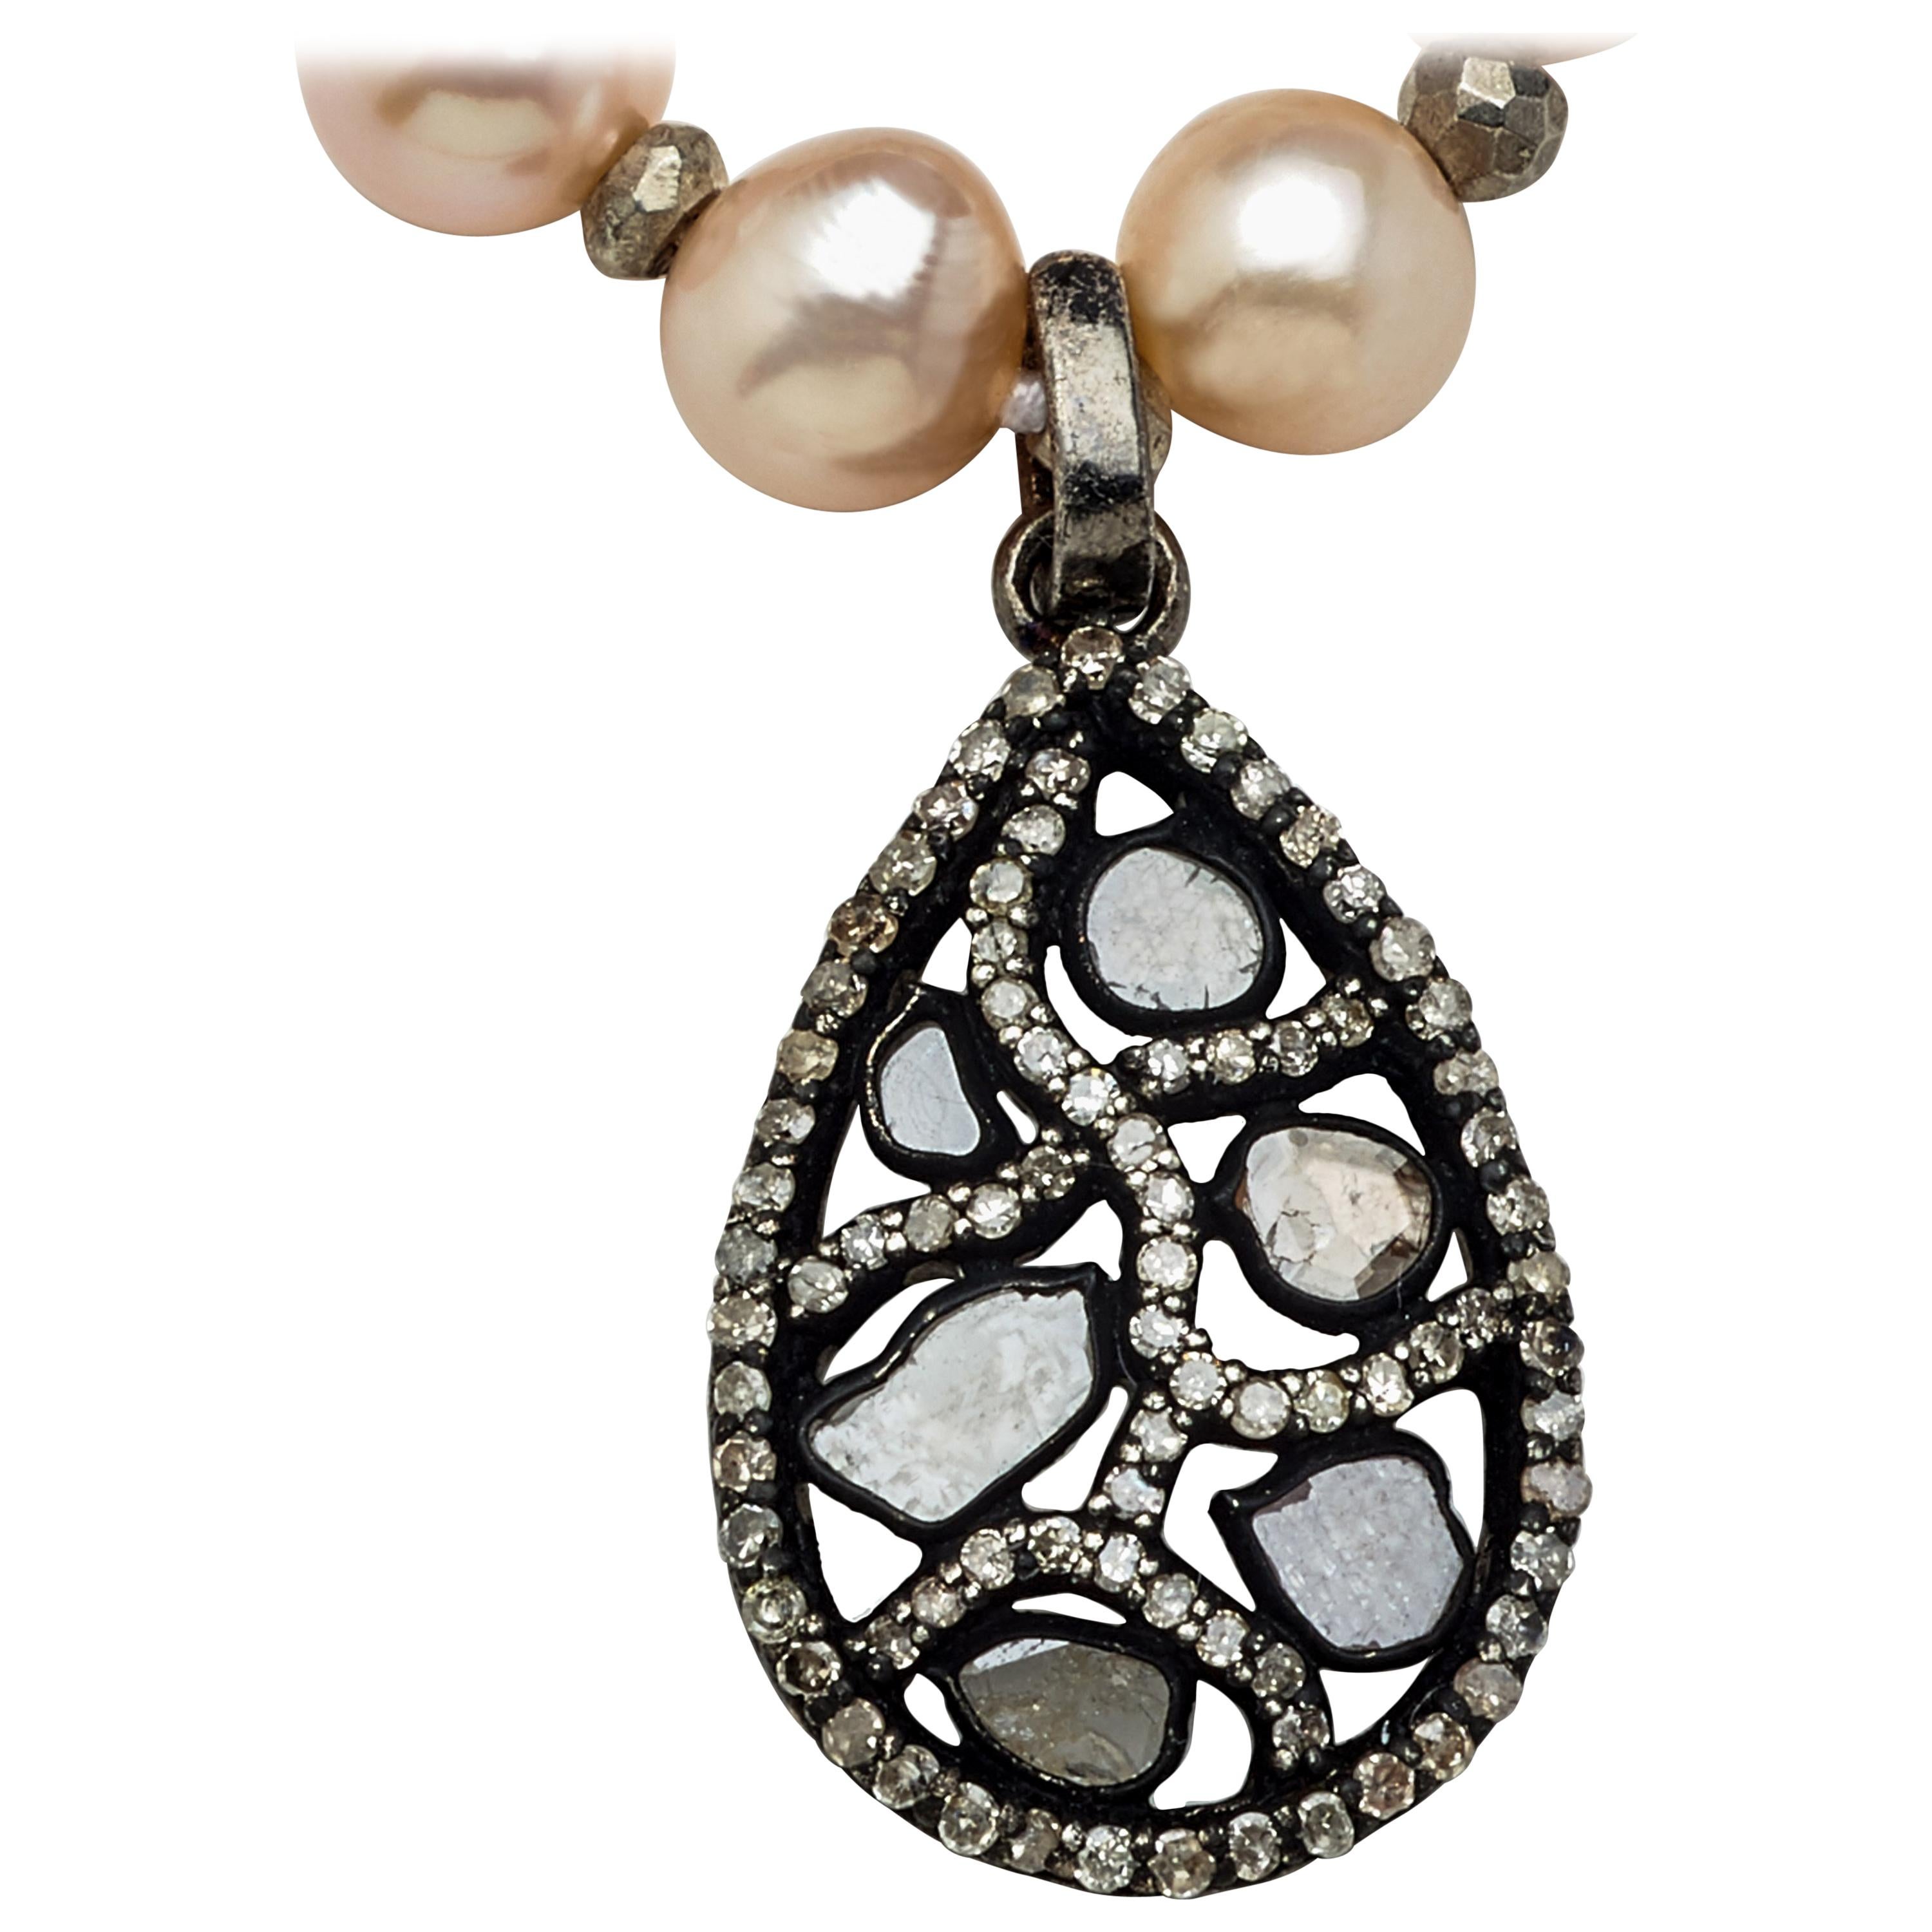 Pretty in Pink, this blush pearl 28 inch strand of eighty-eight 6-1/4mm genuine fine Akoya pearls are hand-strung with enhancing 
Genuine silver pyrite beads leading to a stunning and unique stained glass-like diamond and sterling silver teardrop